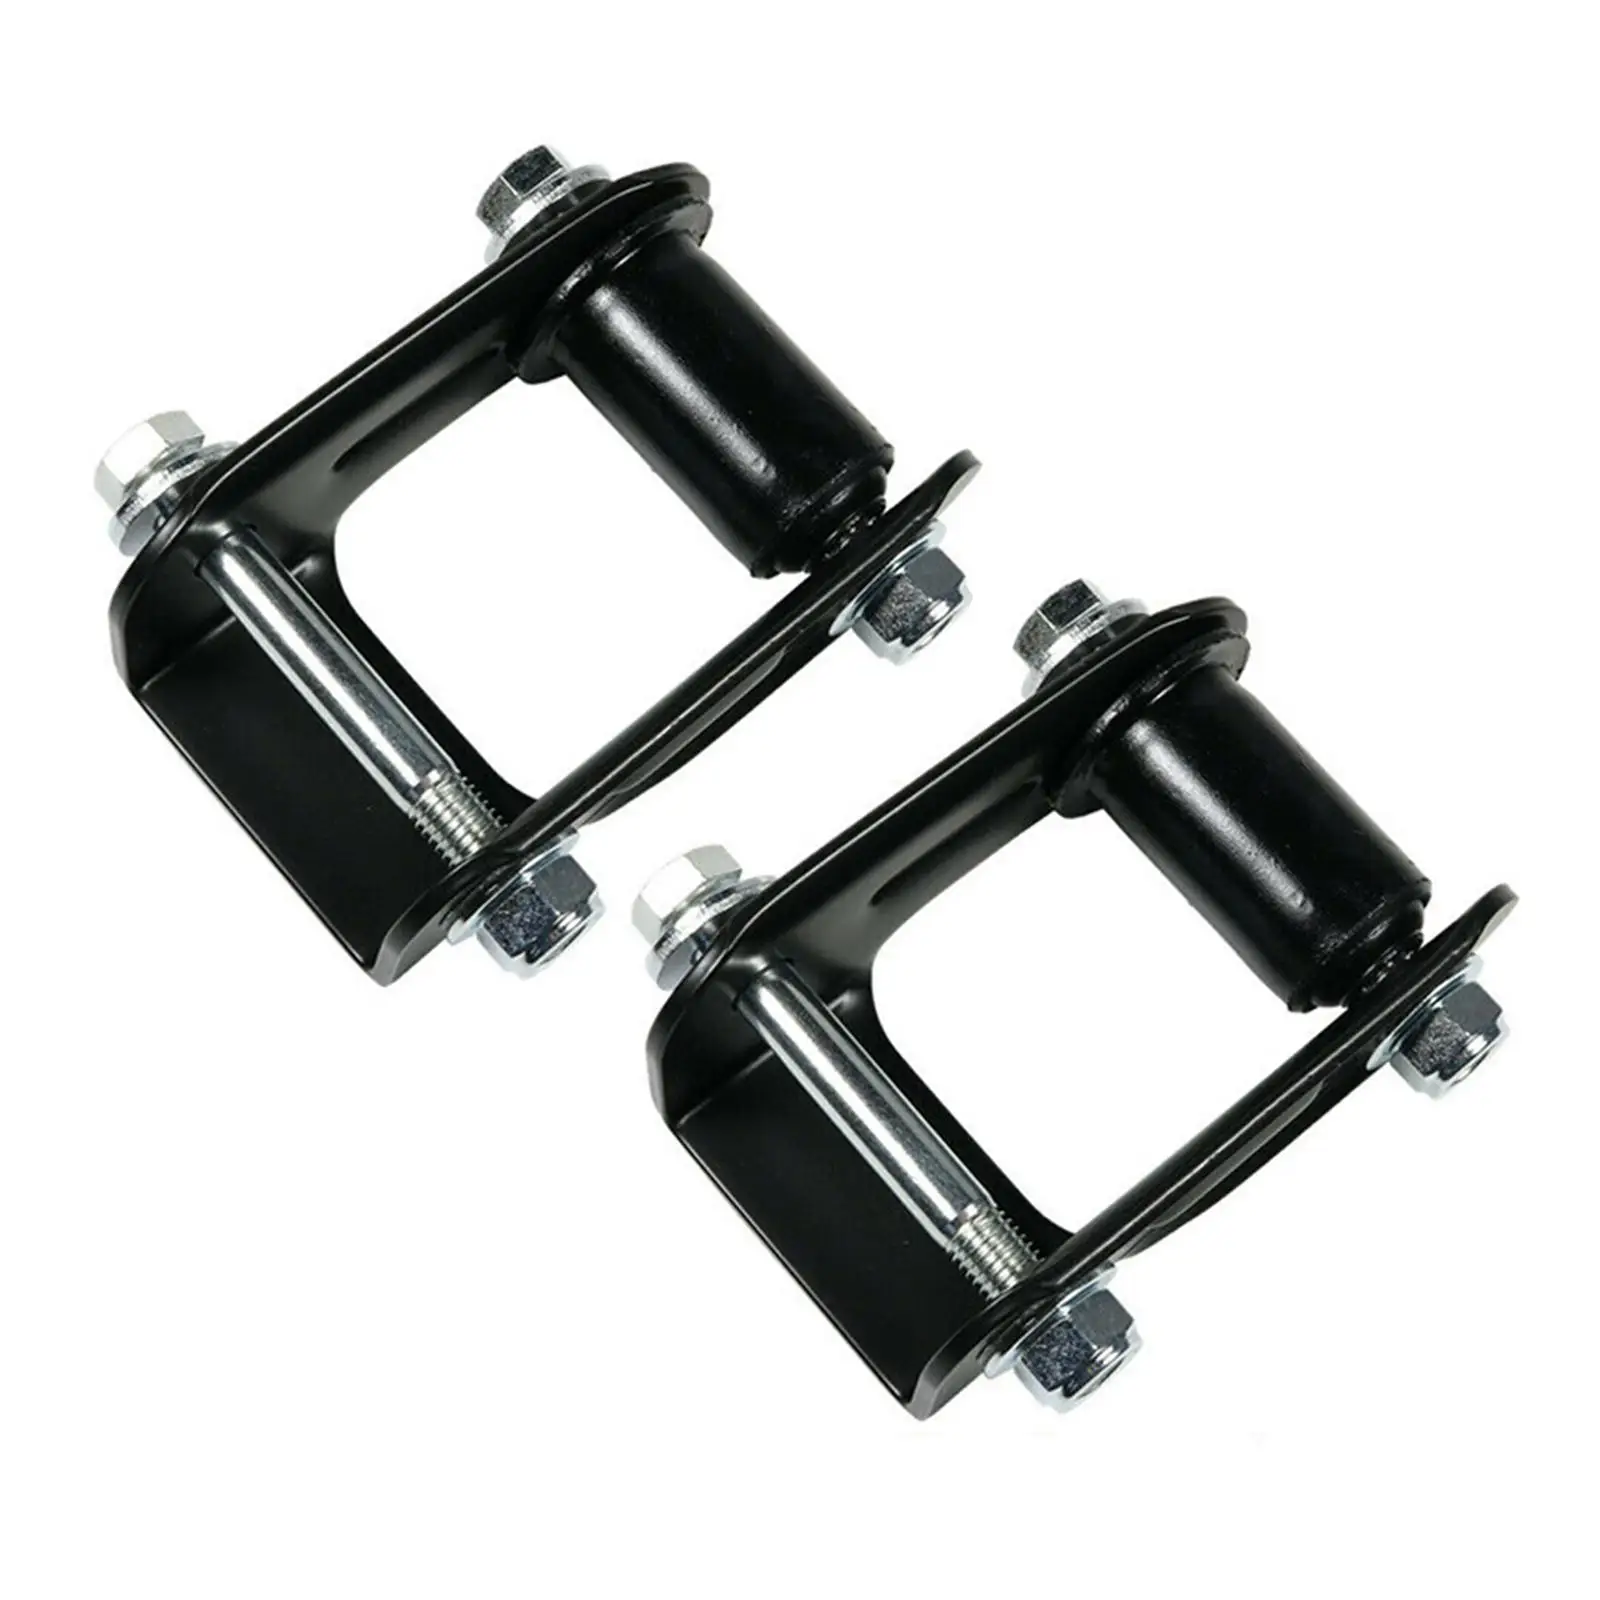 2 Pieces Rear Leaf Spring Shackle Kit Parts Easily Install 15665302 replacement Chevrolet Blazer S10 Blazer S10 Pickup